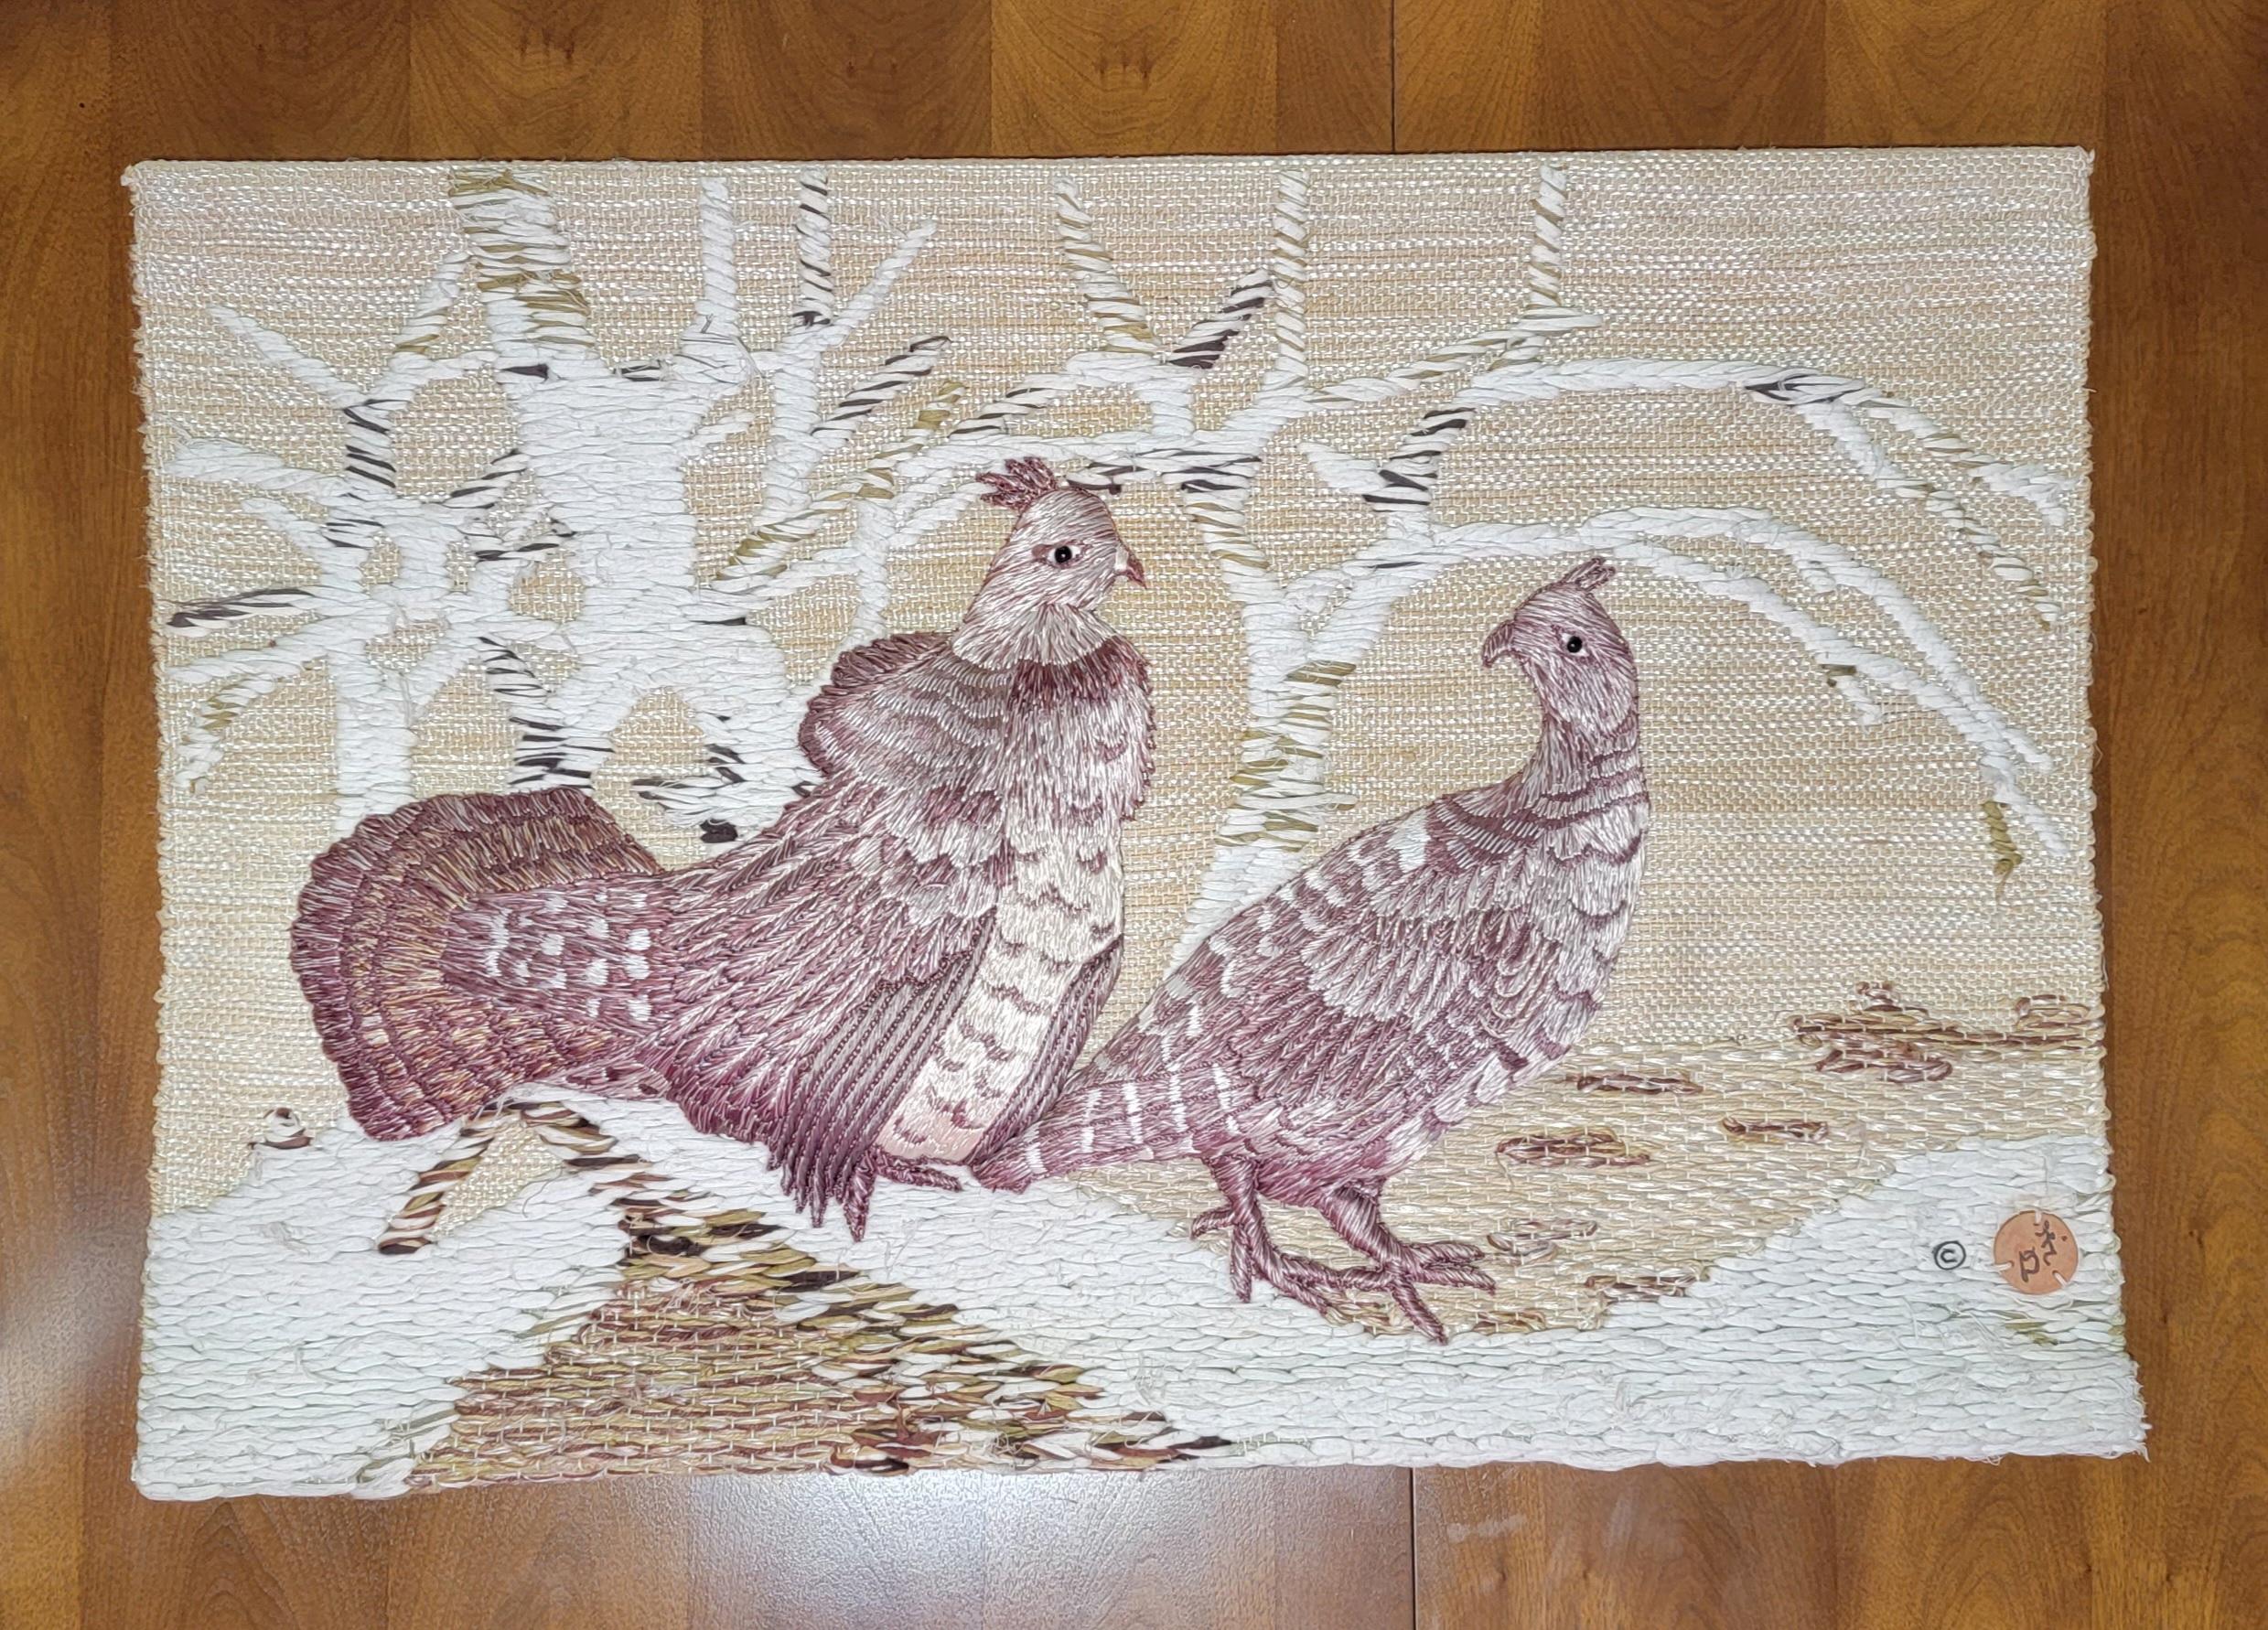 Woven textile wall art by Don Freedman. Highly textured bird motif textile that appears to Pheasant or Grouse with trees in background. Signed lower right corner. Retains cloth label verso. Measures 38